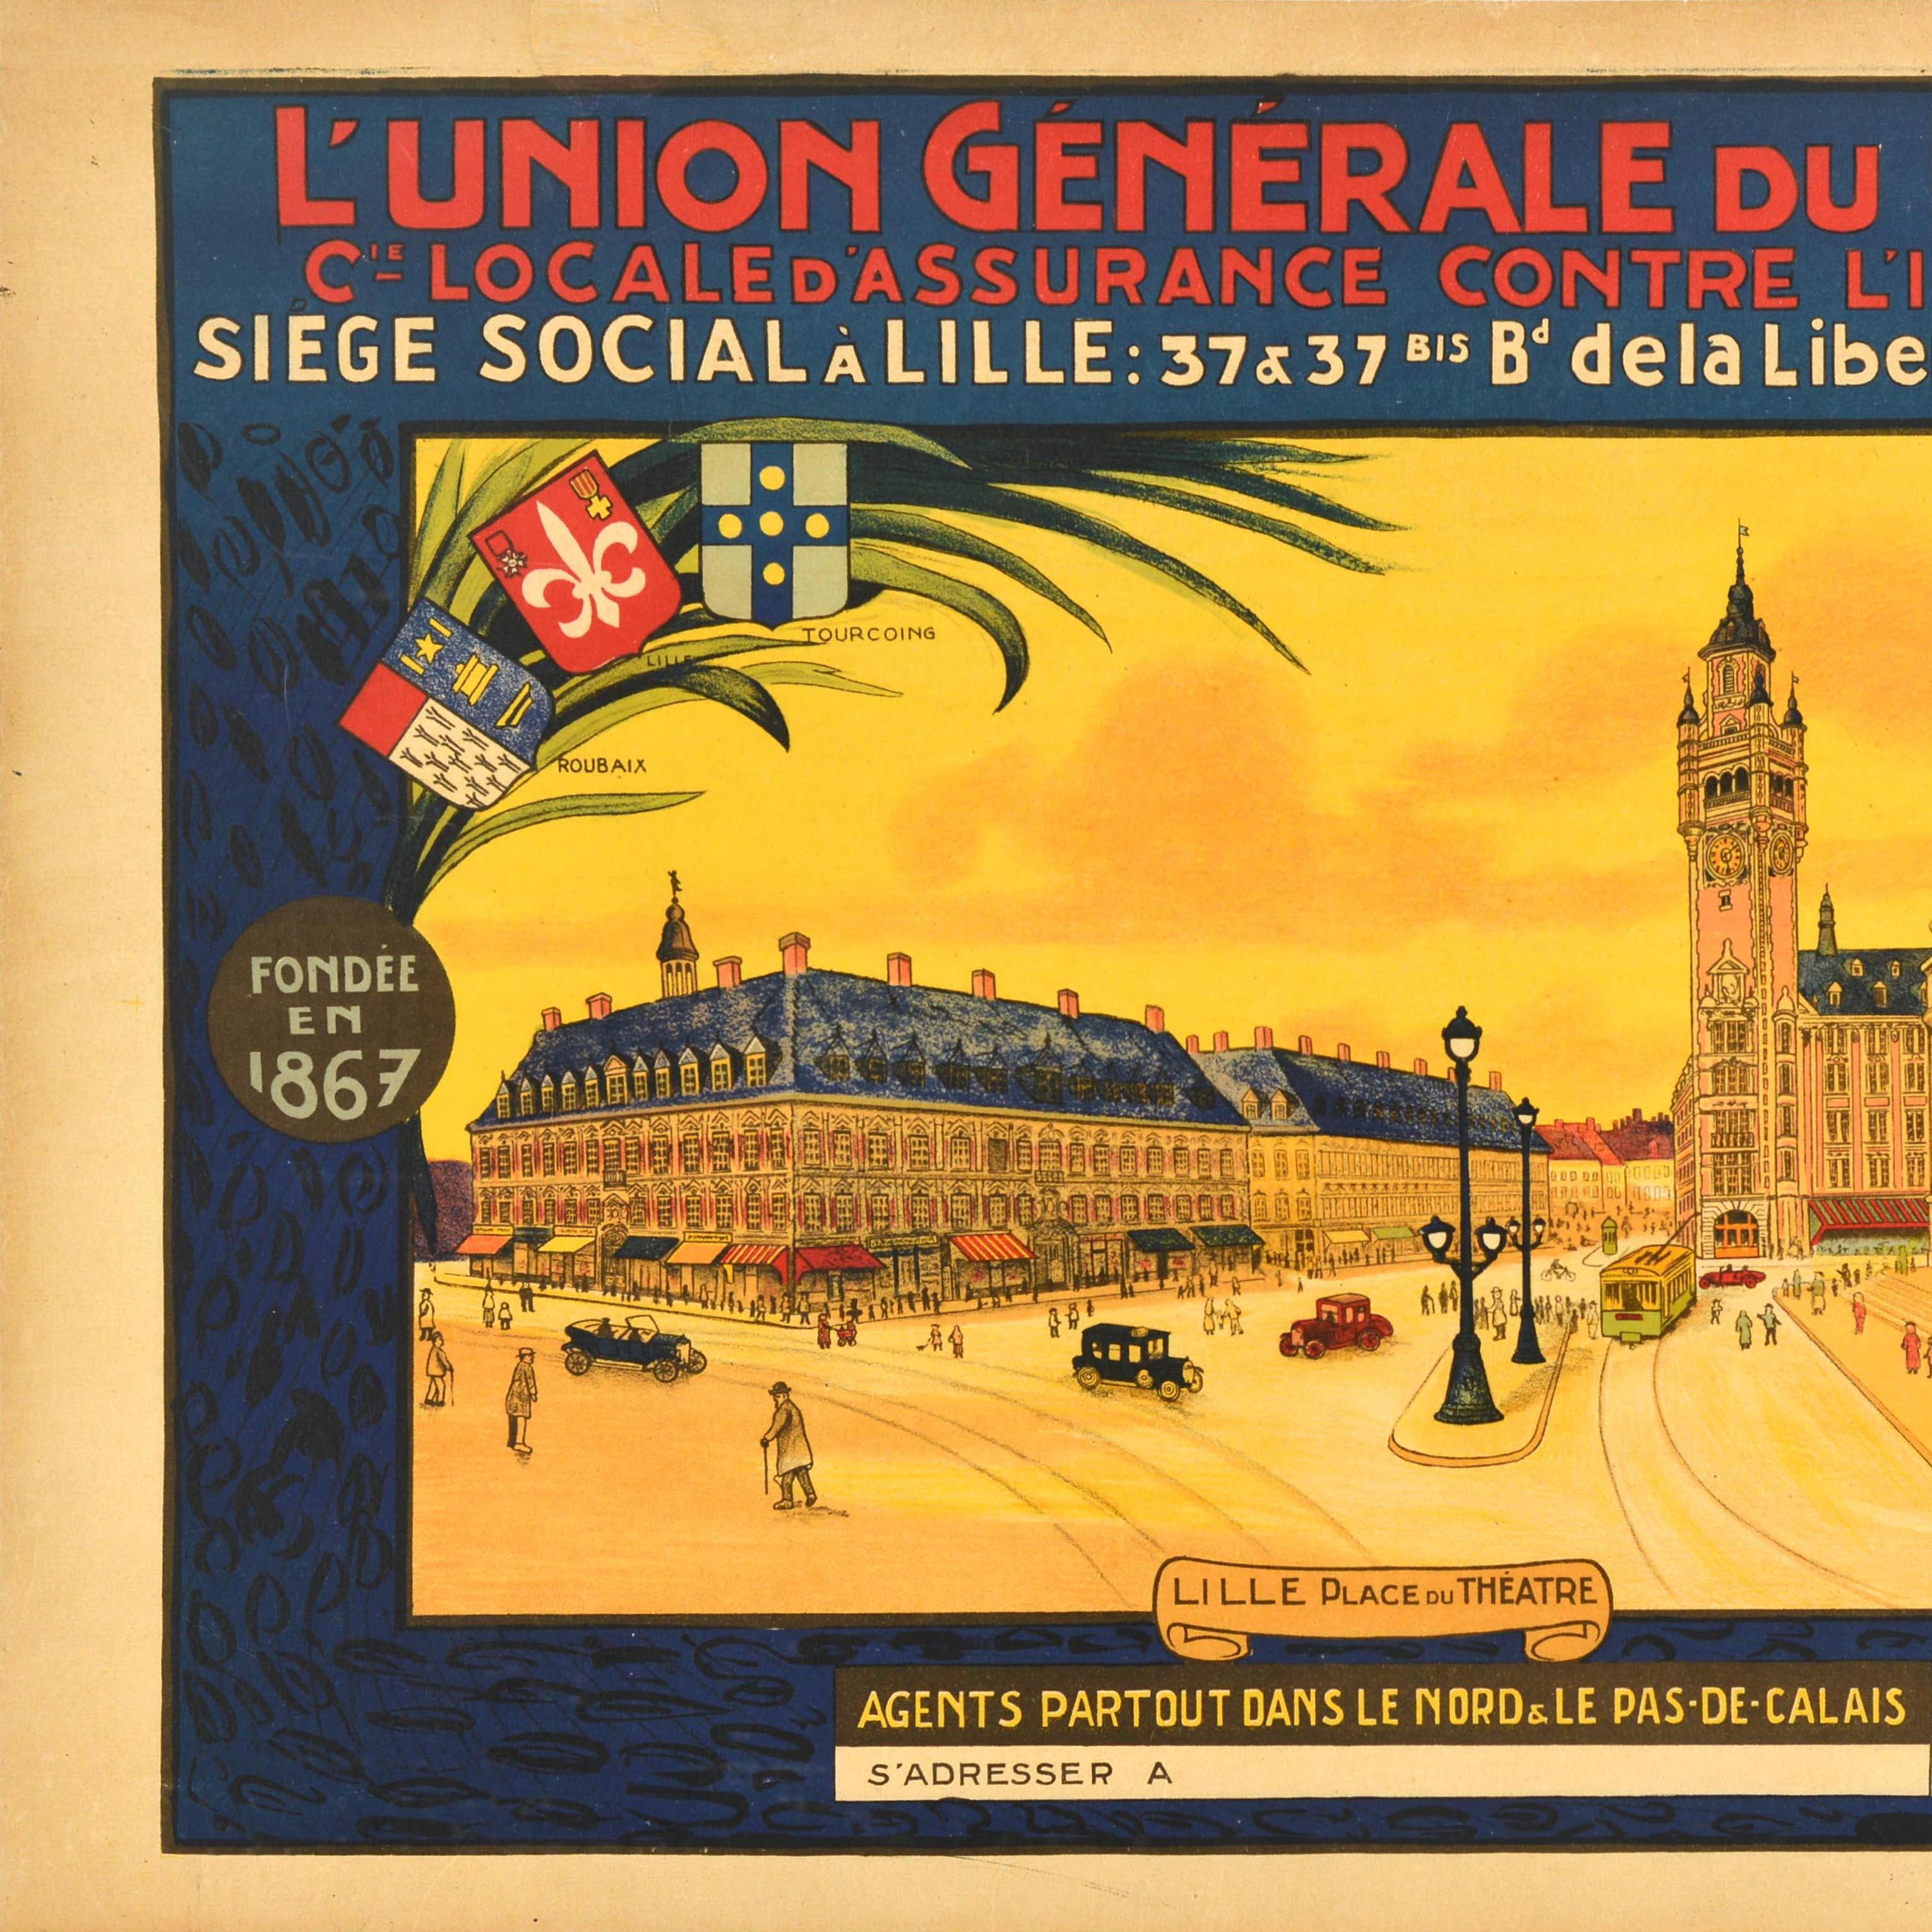 Original vintage advertising poster for The General Union of the North Local Company of Insurance Against Fire Headquarters in Lille founded in 1876 - L'Union Generale Du Nord Cie Locale d'Assurance Contre l'Incendie Siege Social a Lille 37